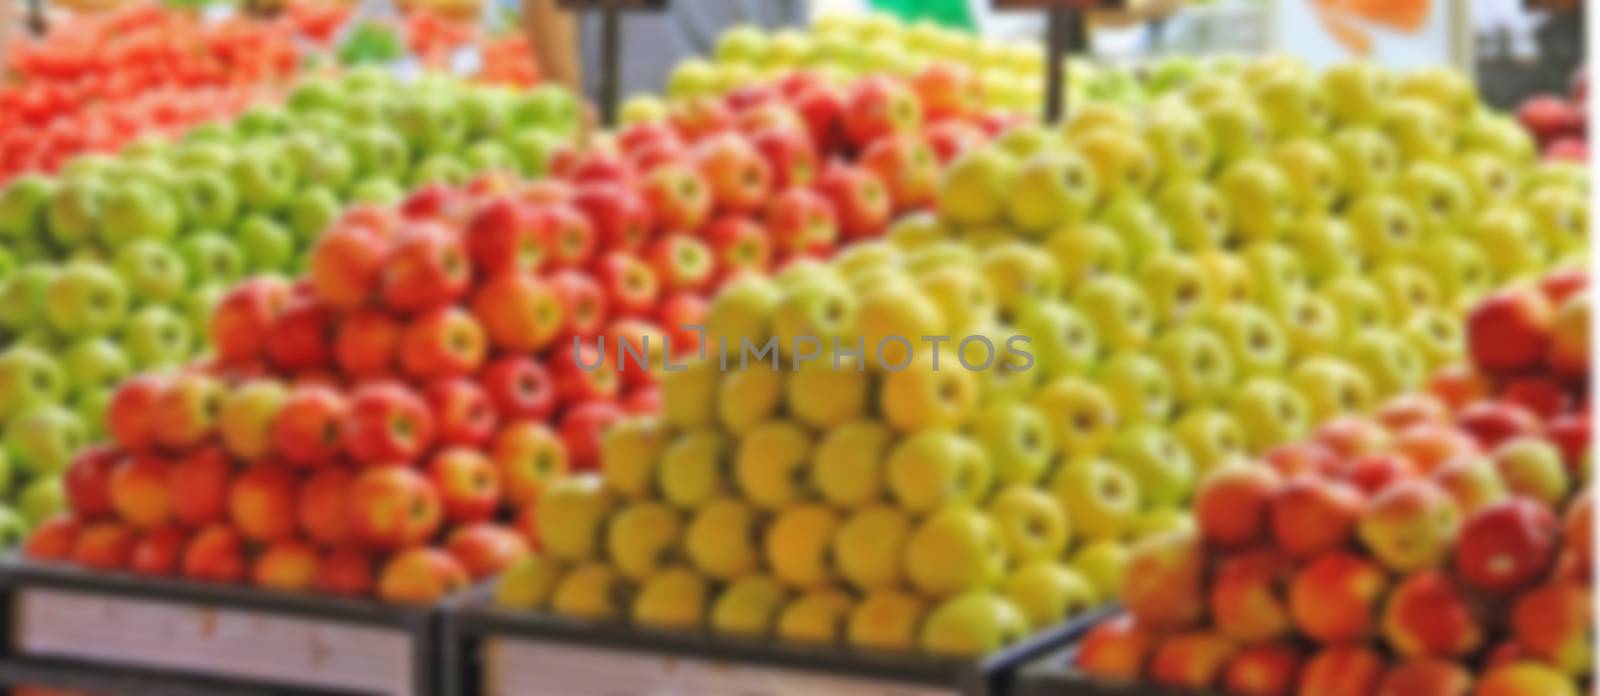 apples on the counter retail sales, green and red fruits for hea by KoliadzynskaIryna